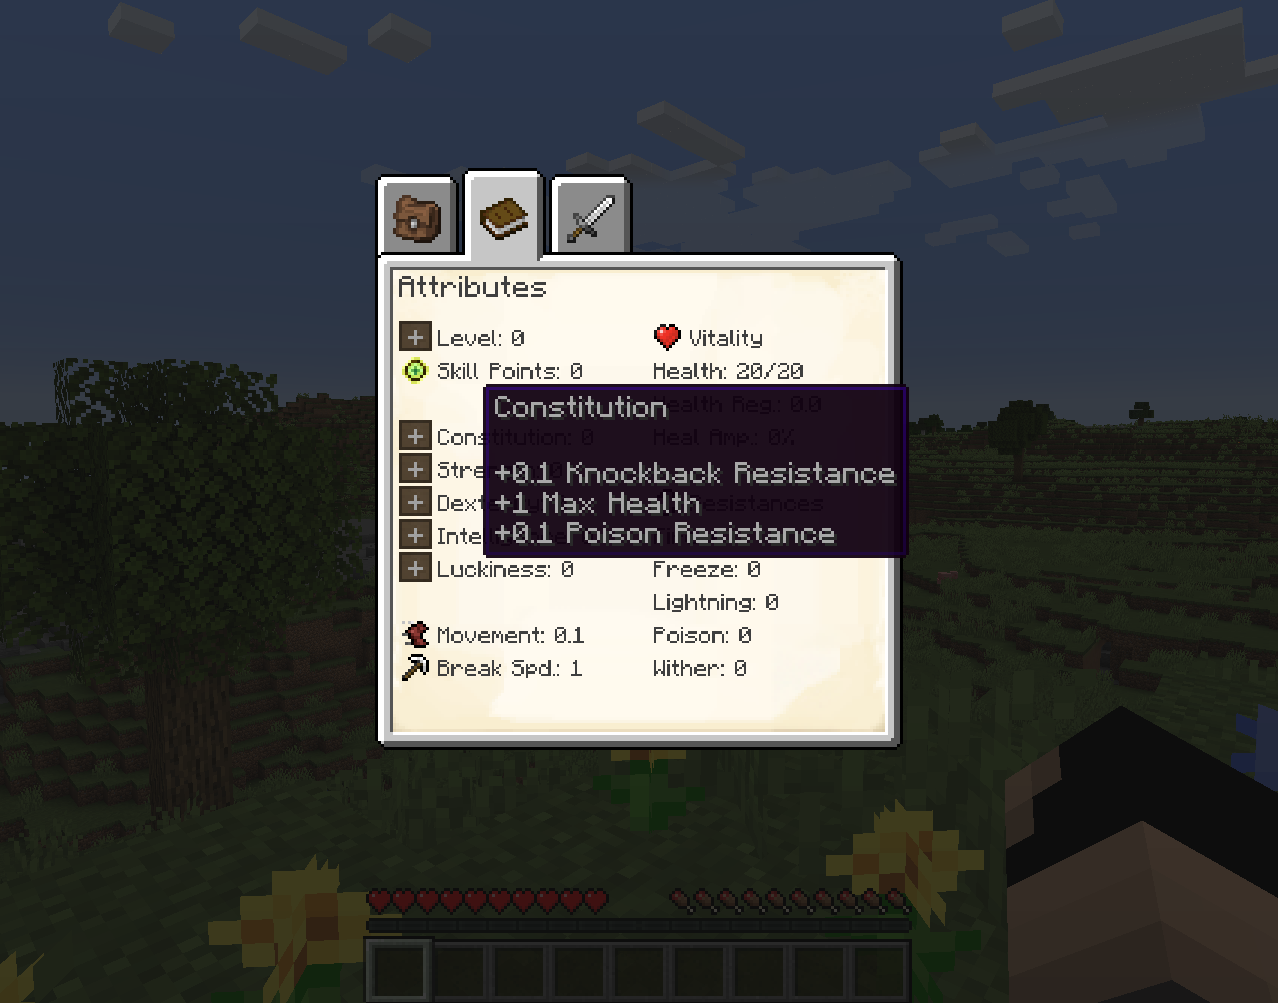 GitHub - CleverNucleus/playerex: Adds RPG attributes to Minecraft